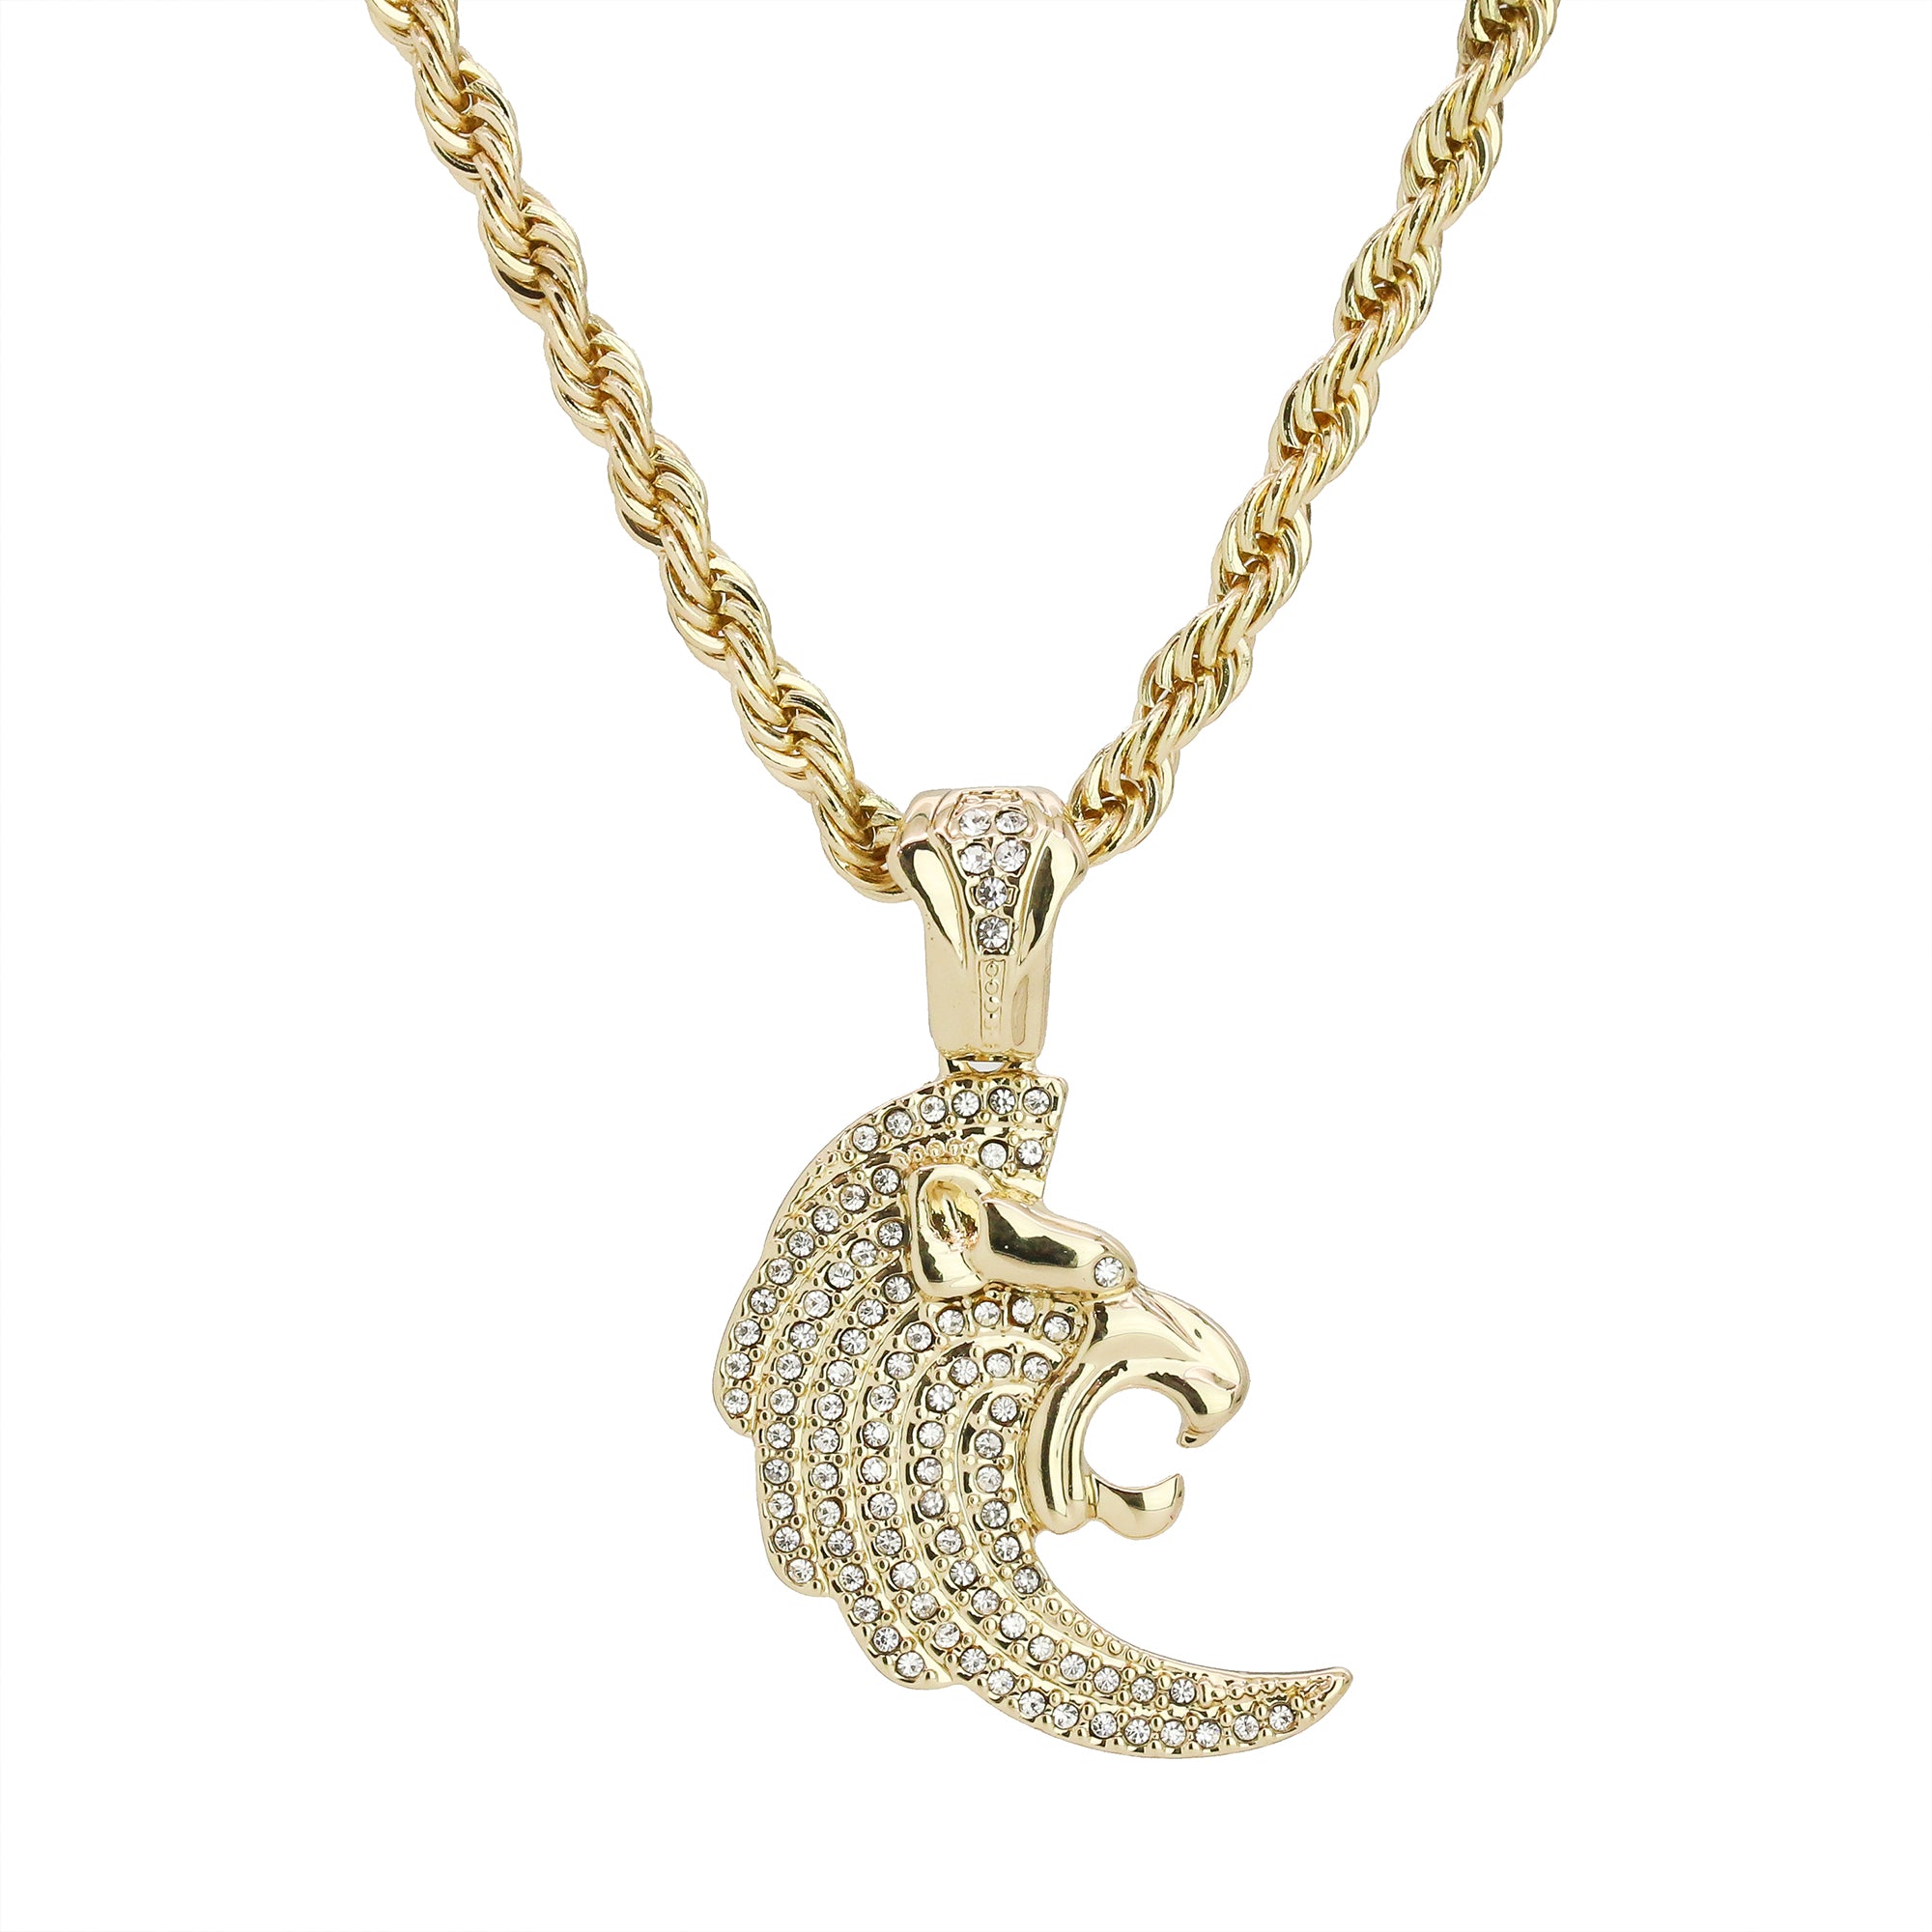 Cz Curved Lion Head Pendant 24" Rope Chain Men's Hip Hop Style 18k Jewelry